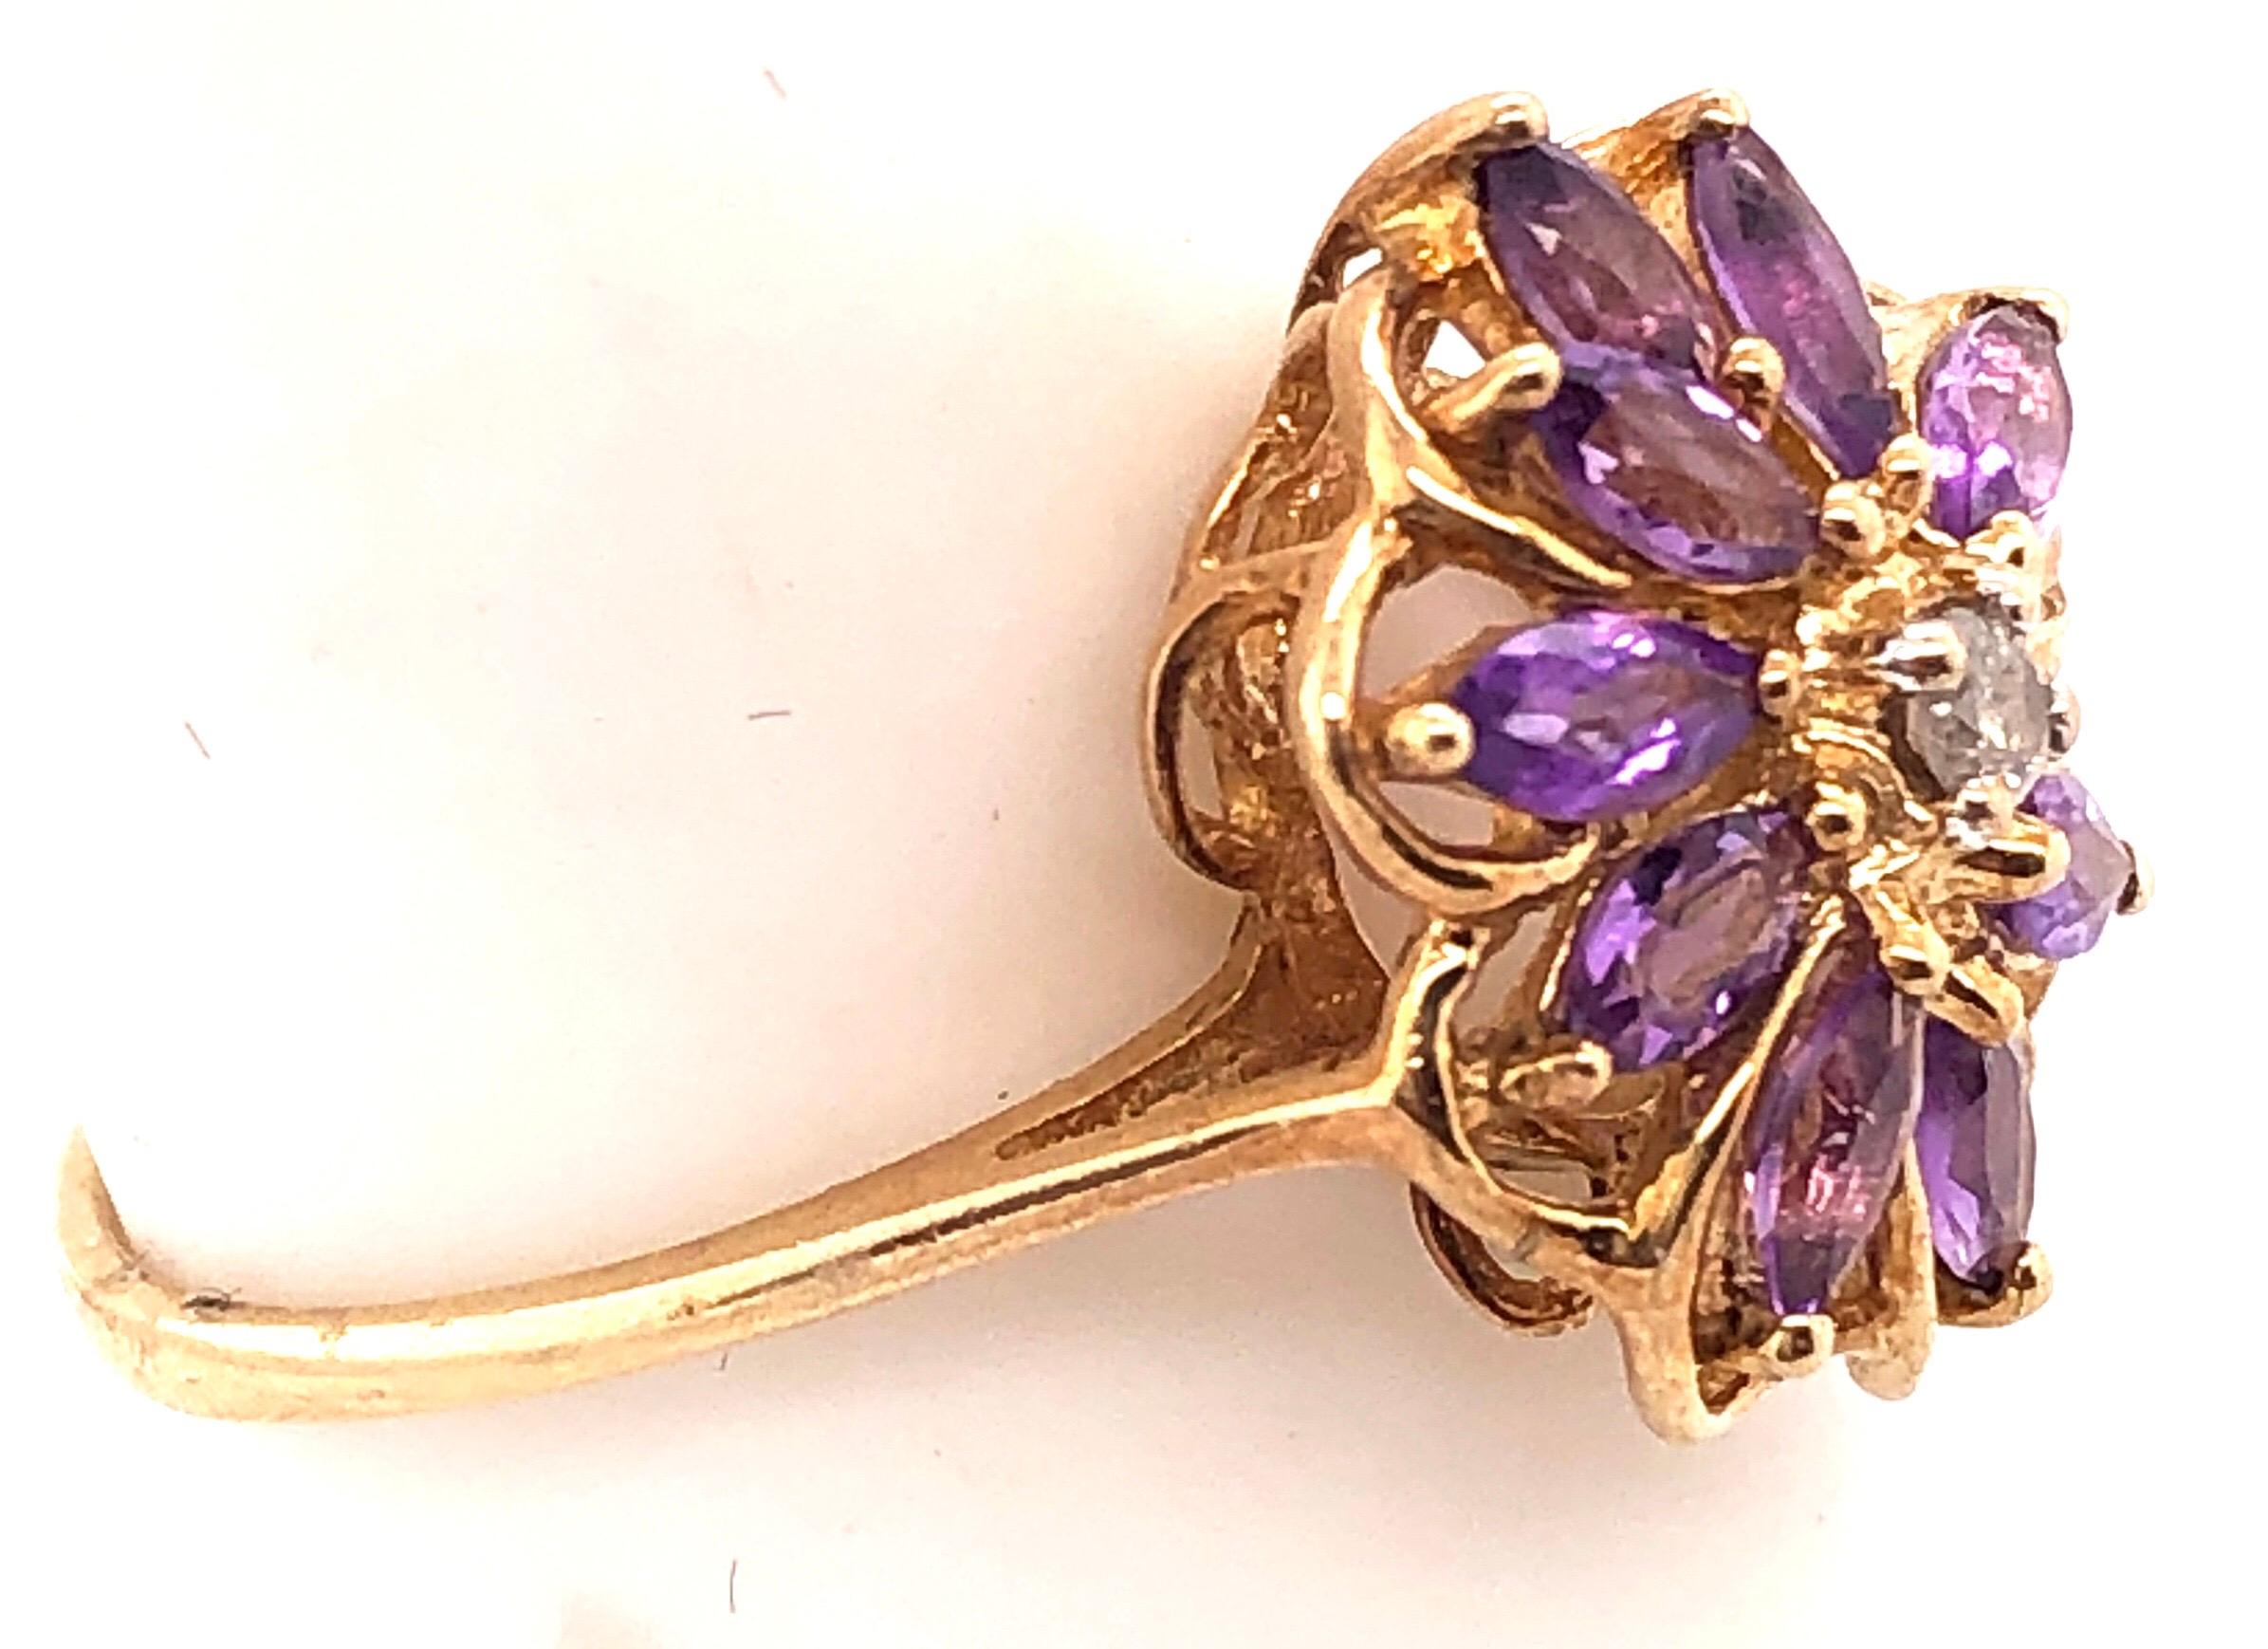 10 Karat Yellow Gold Fashion Oval Amethyst  Ring with  Round Diamond 0.03 TDW.
Size 8 
2.32 grams total weight.